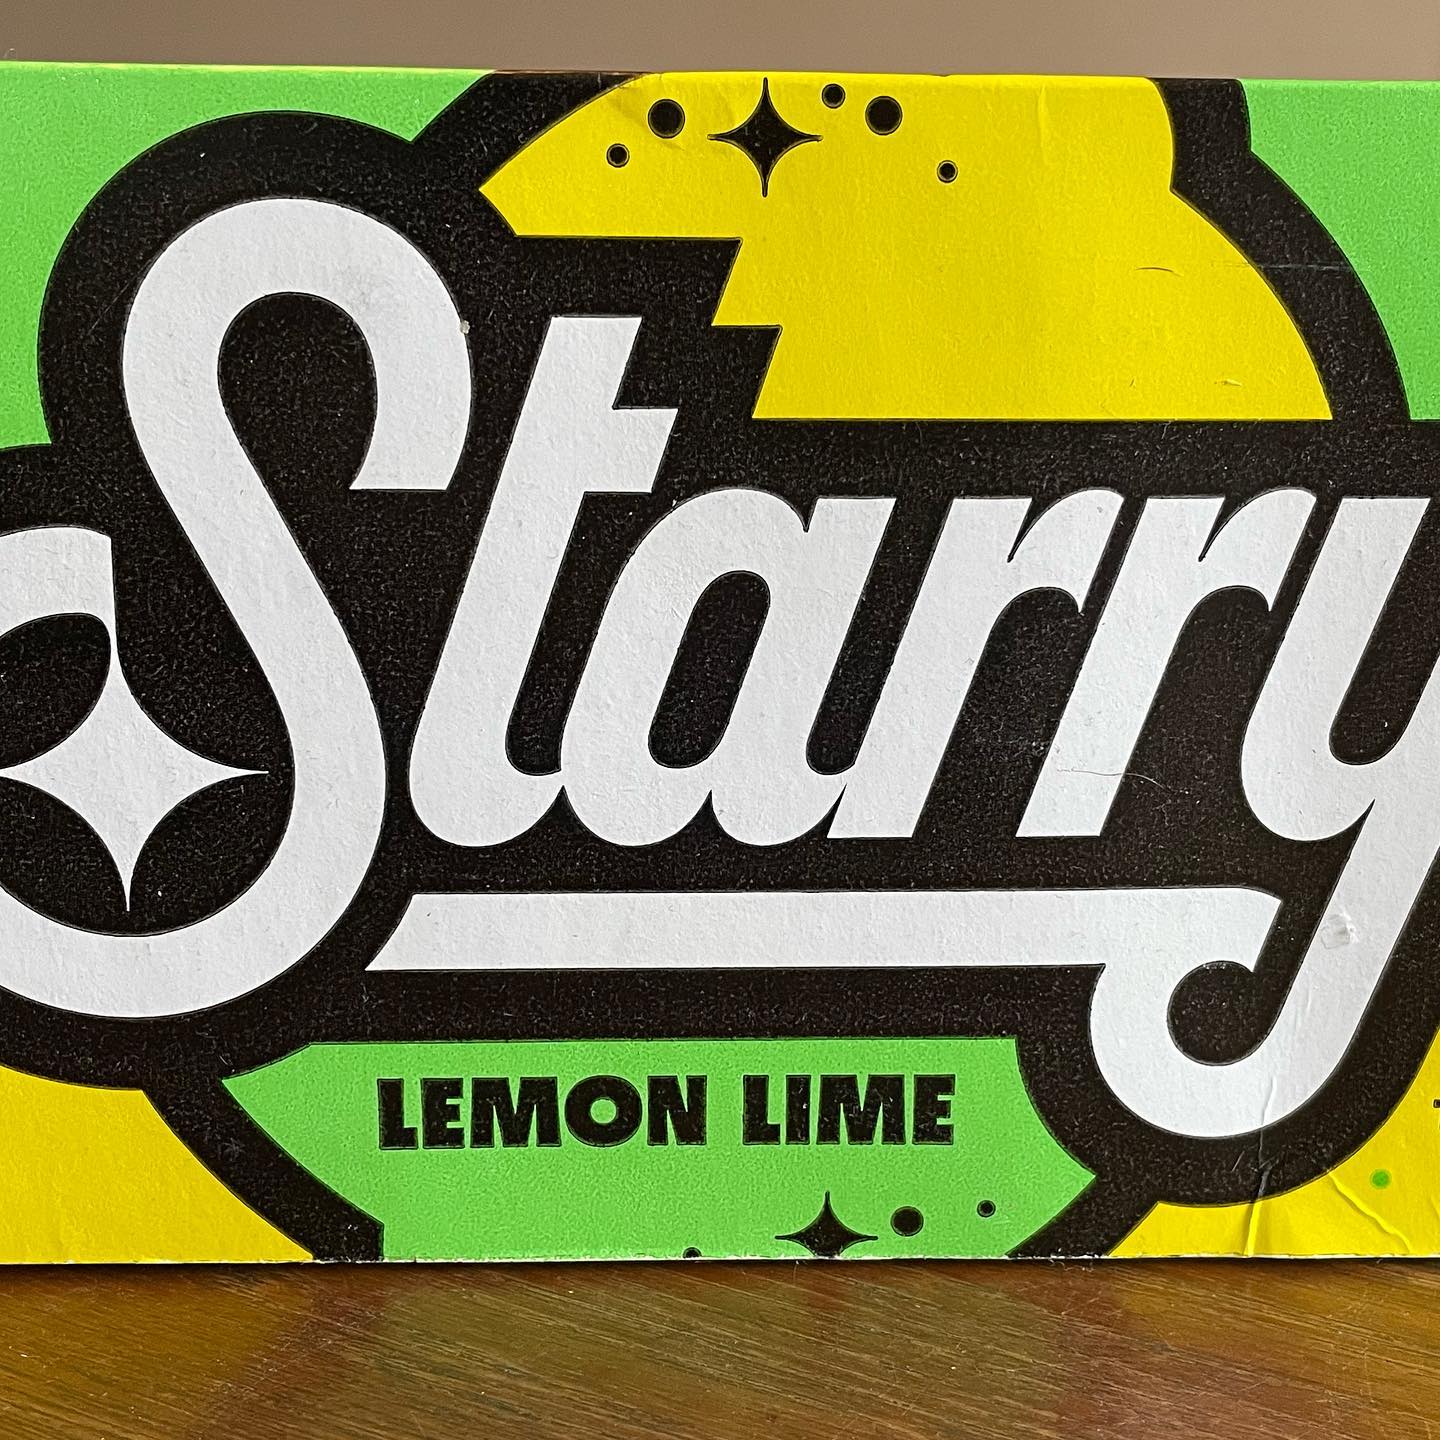 Lovin’ the retro styling of @starrylemonlime packaging. Fun typographic details and a fresh brand in a crowded (and visually tired) space.